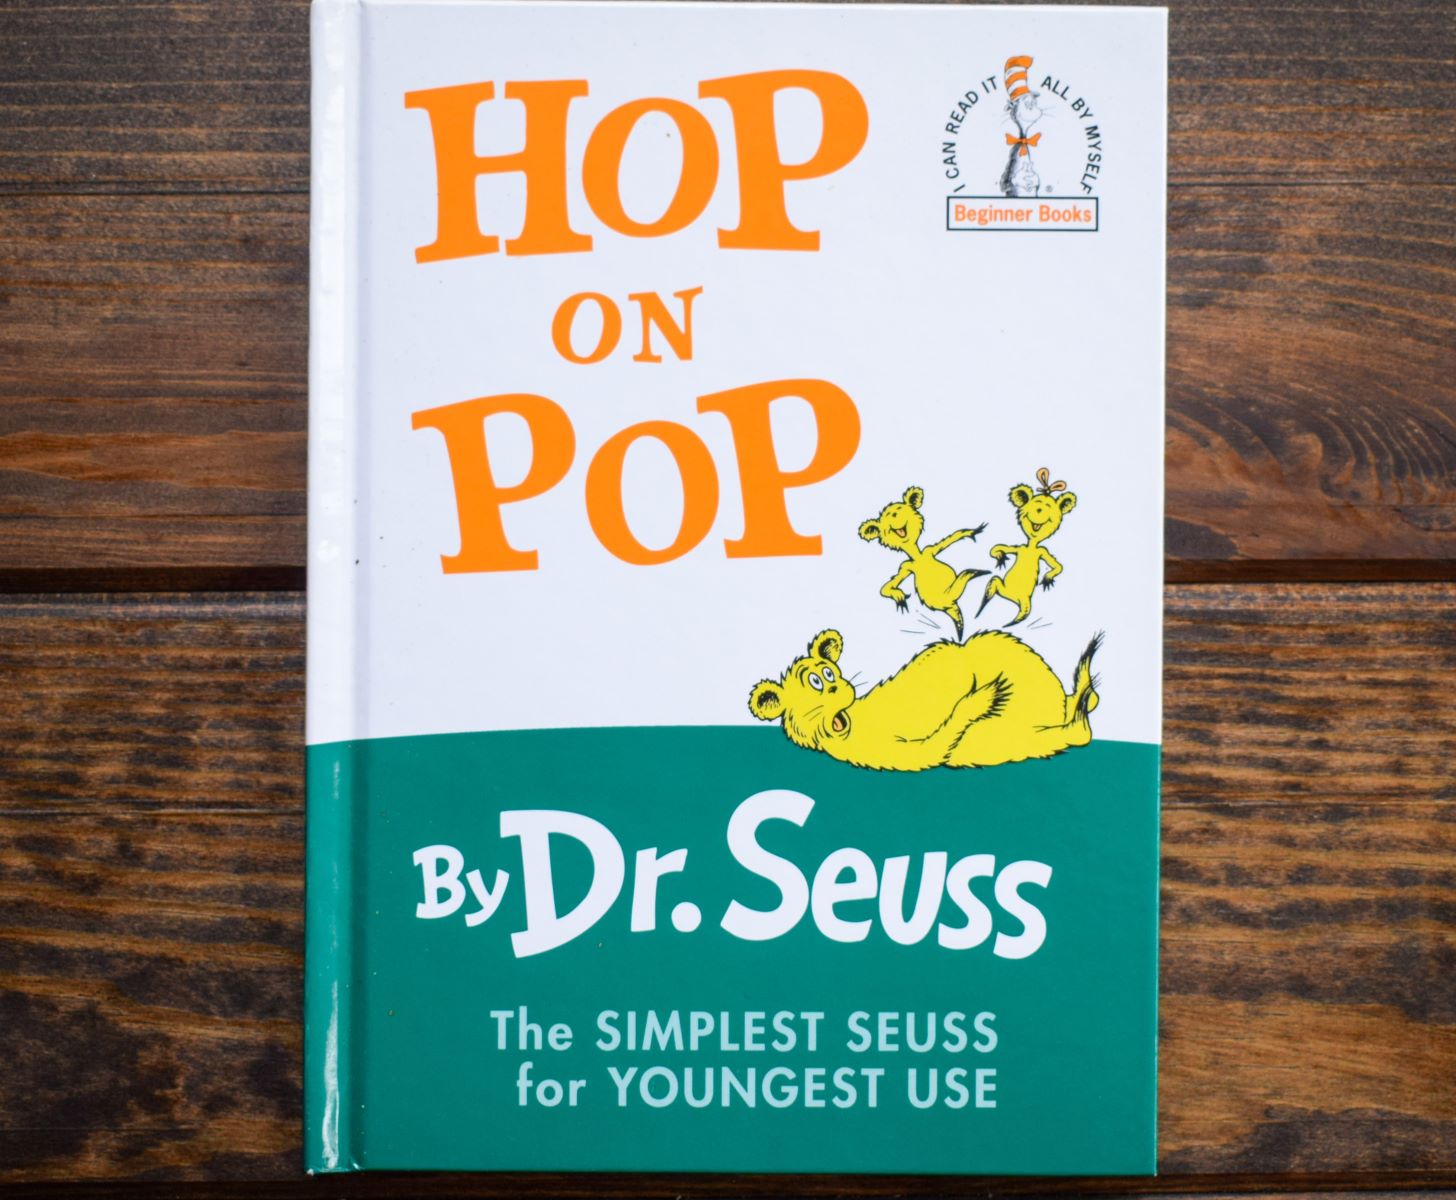 Shocking! The Controversial Ban On Dr. Seuss's 'Hop On Pop' In Libraries